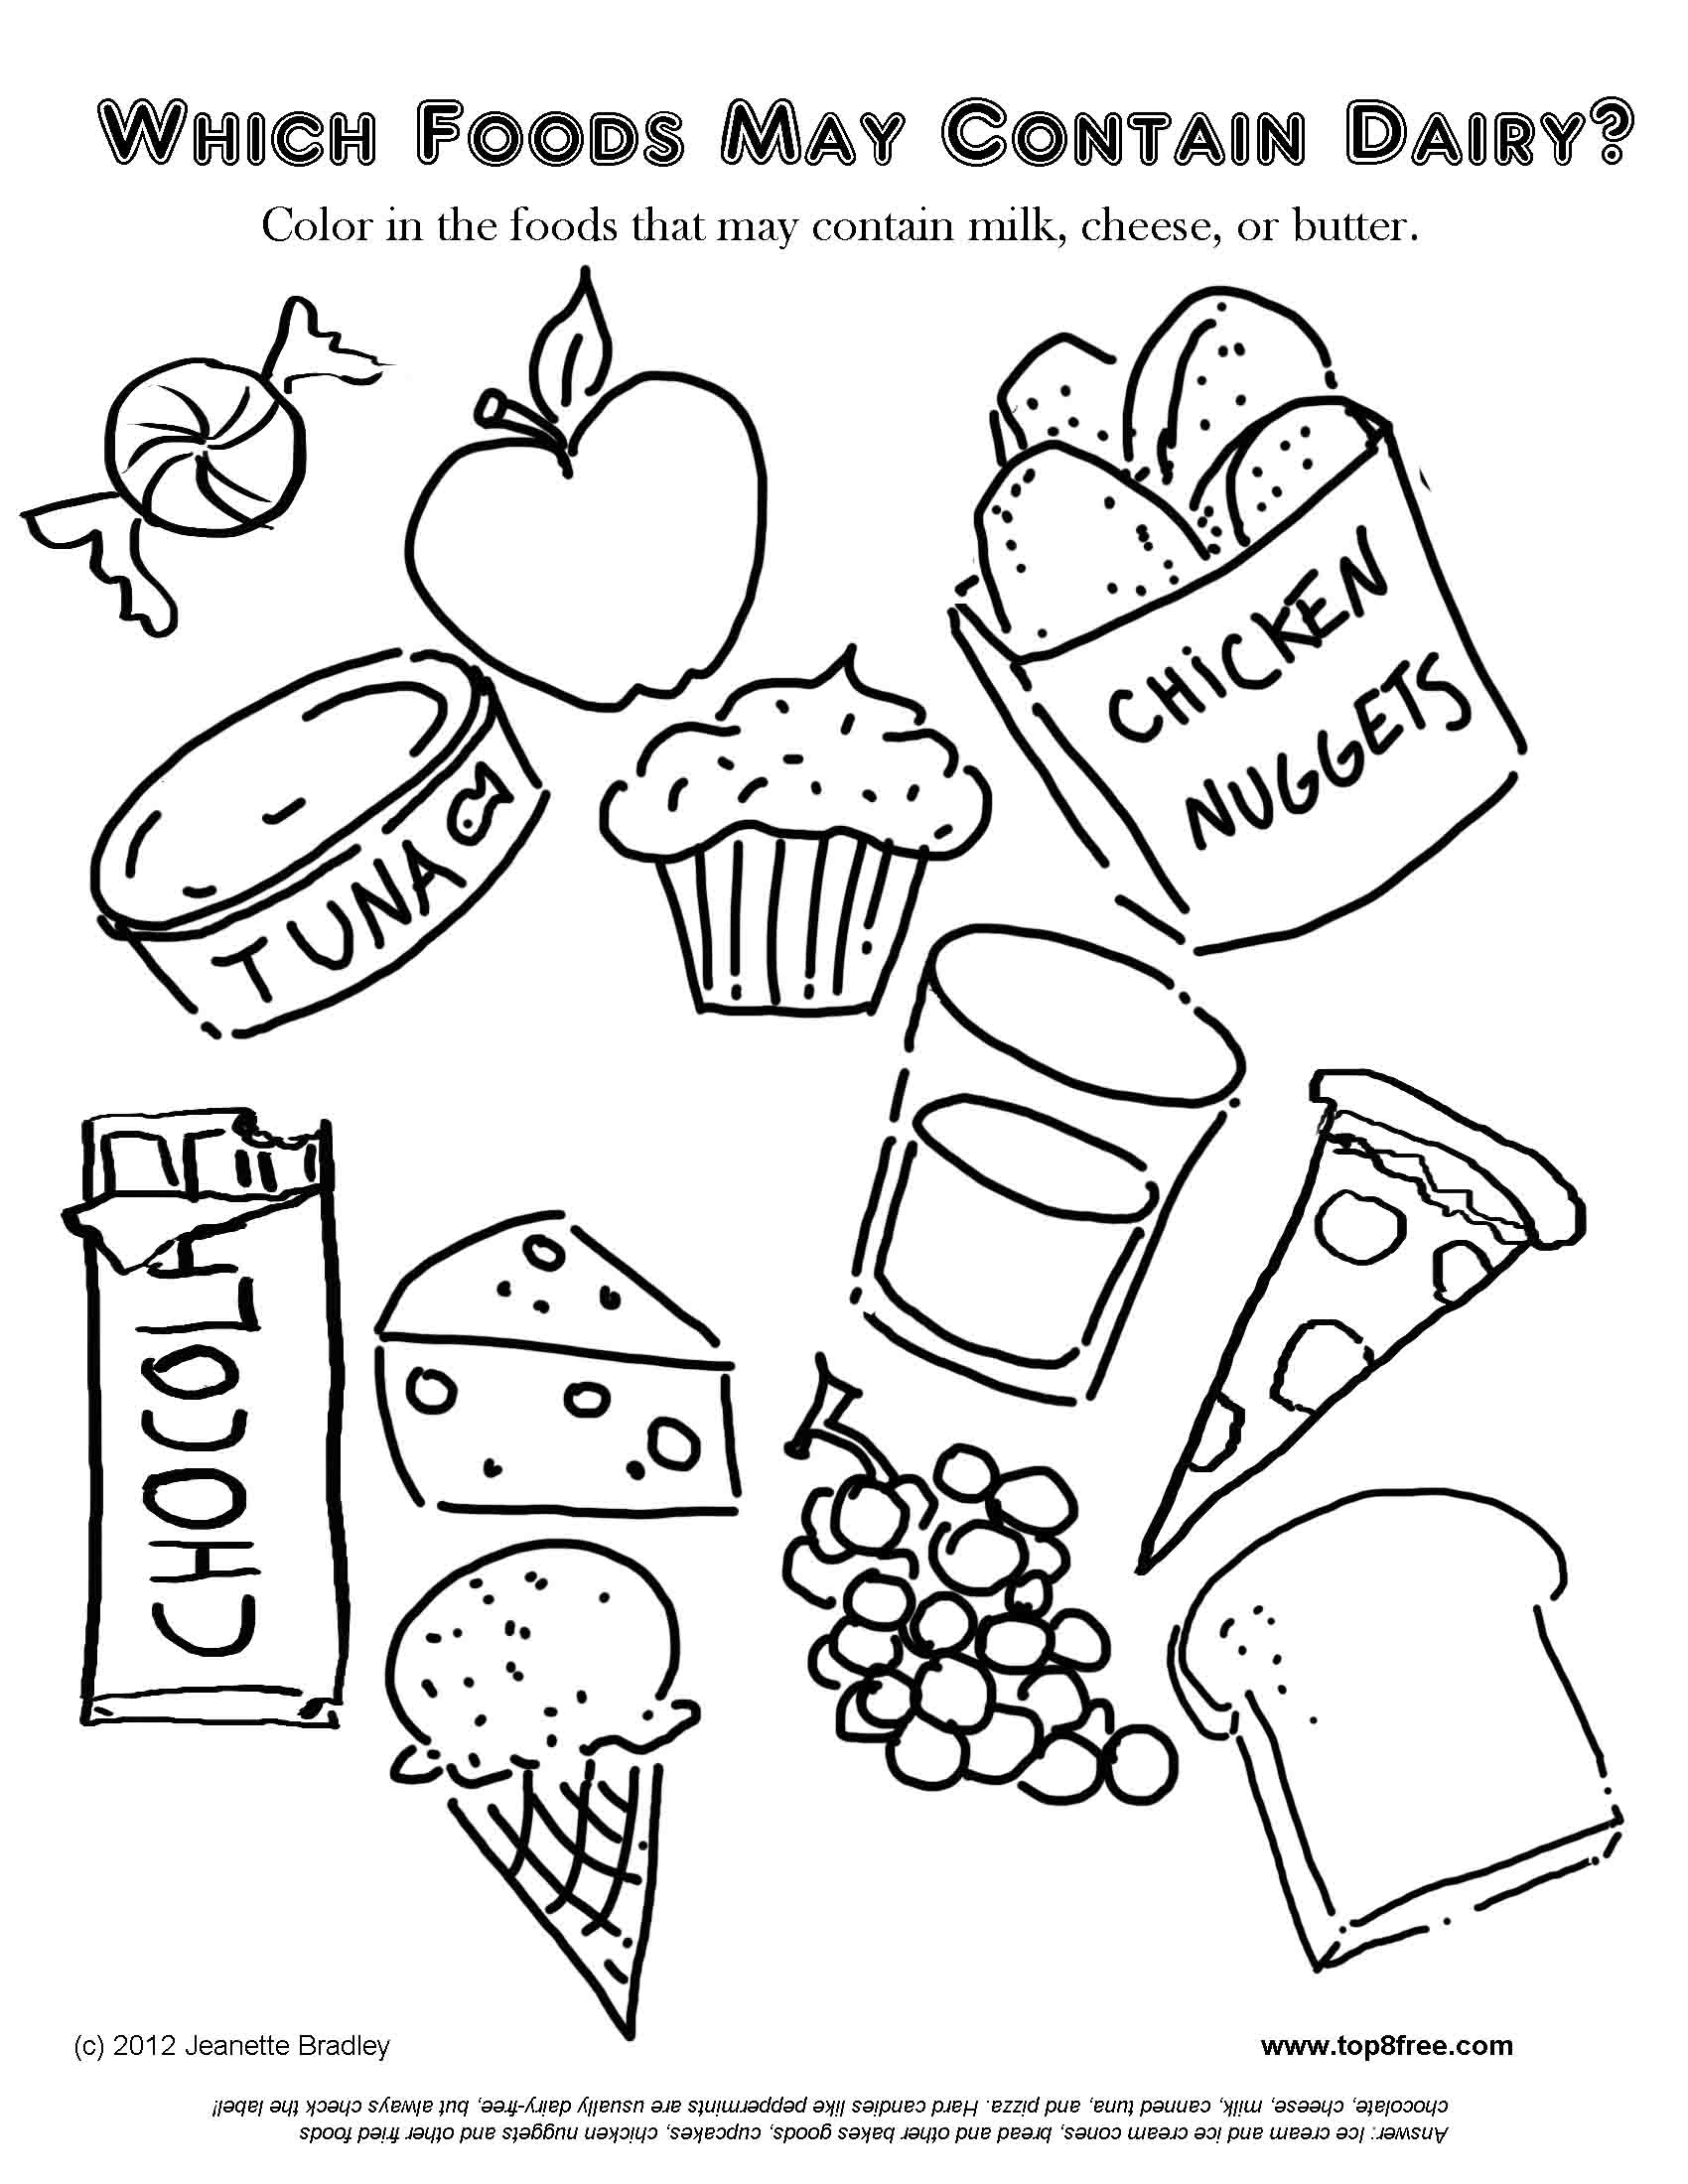 Food Pyramid Coloring Pages Food Groups Free Coloring Pages On Art Coloring Pages